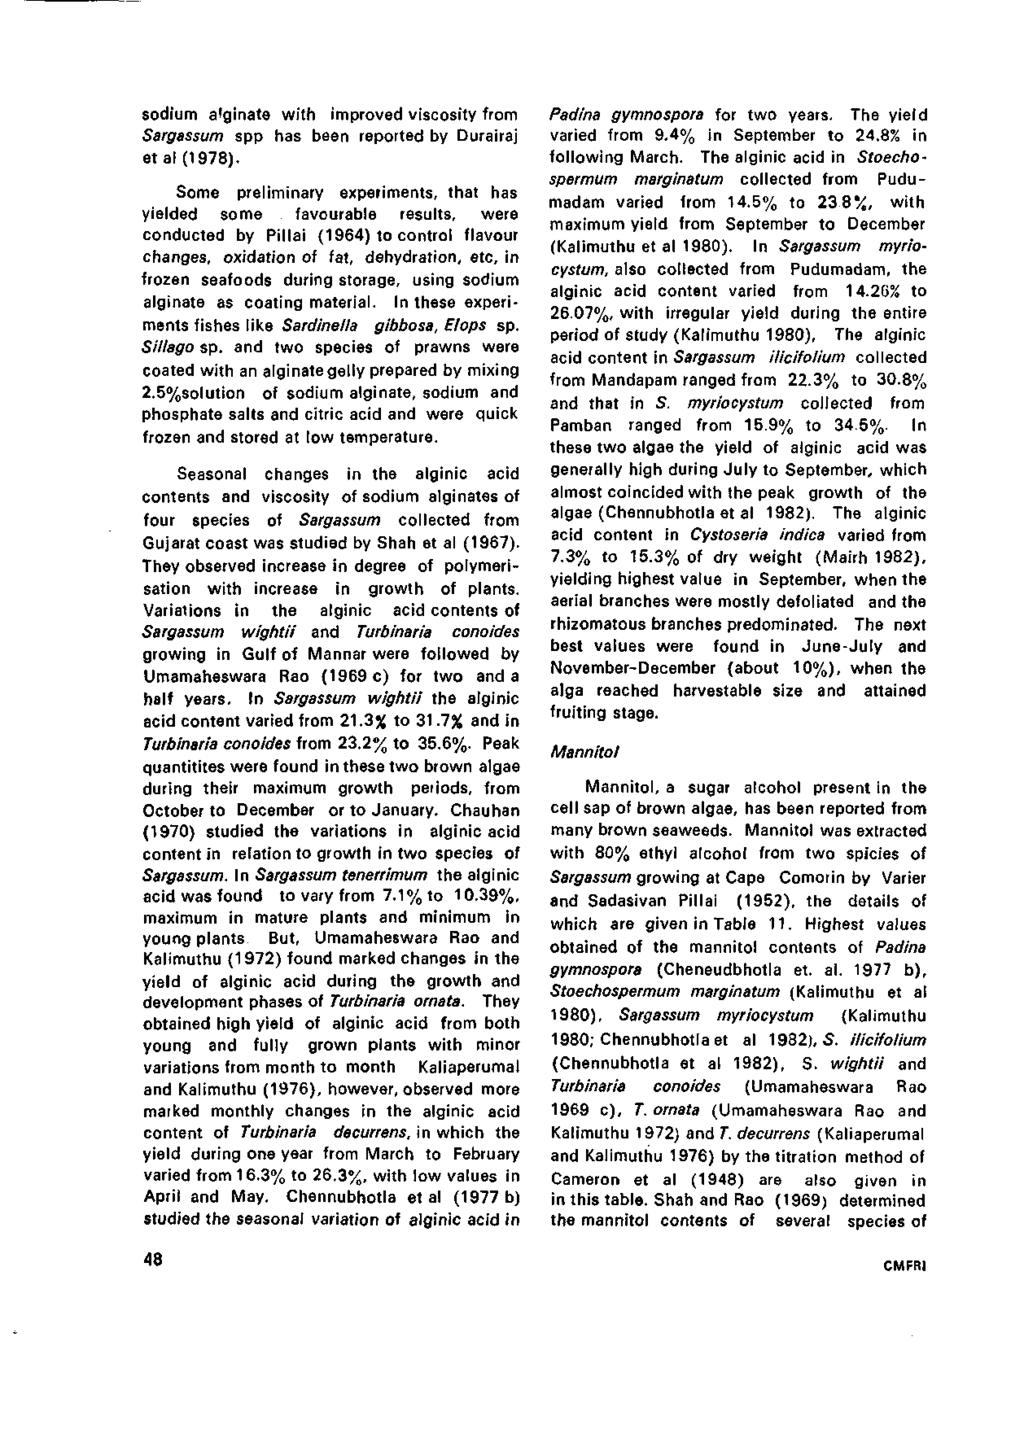 sodium alginate with improved viscosity from Sargassum spp has been reported by Durairaj etal(1978).